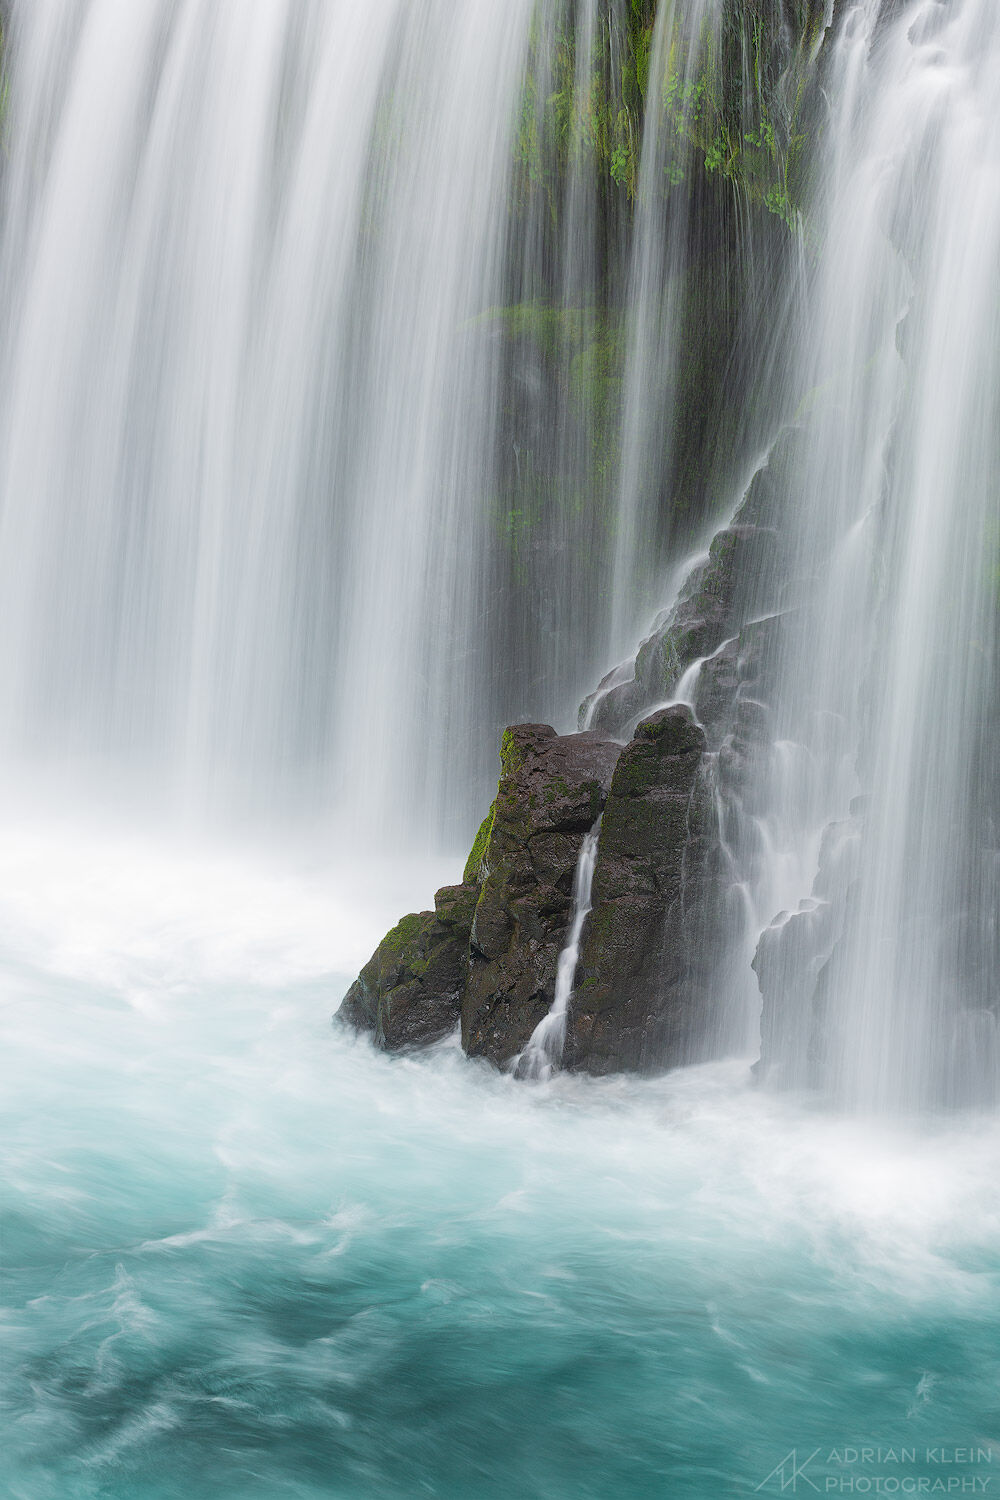 A turquoise waterfall in the pacific northwest runs high and fast during Spring time. Limited Edition of 50.